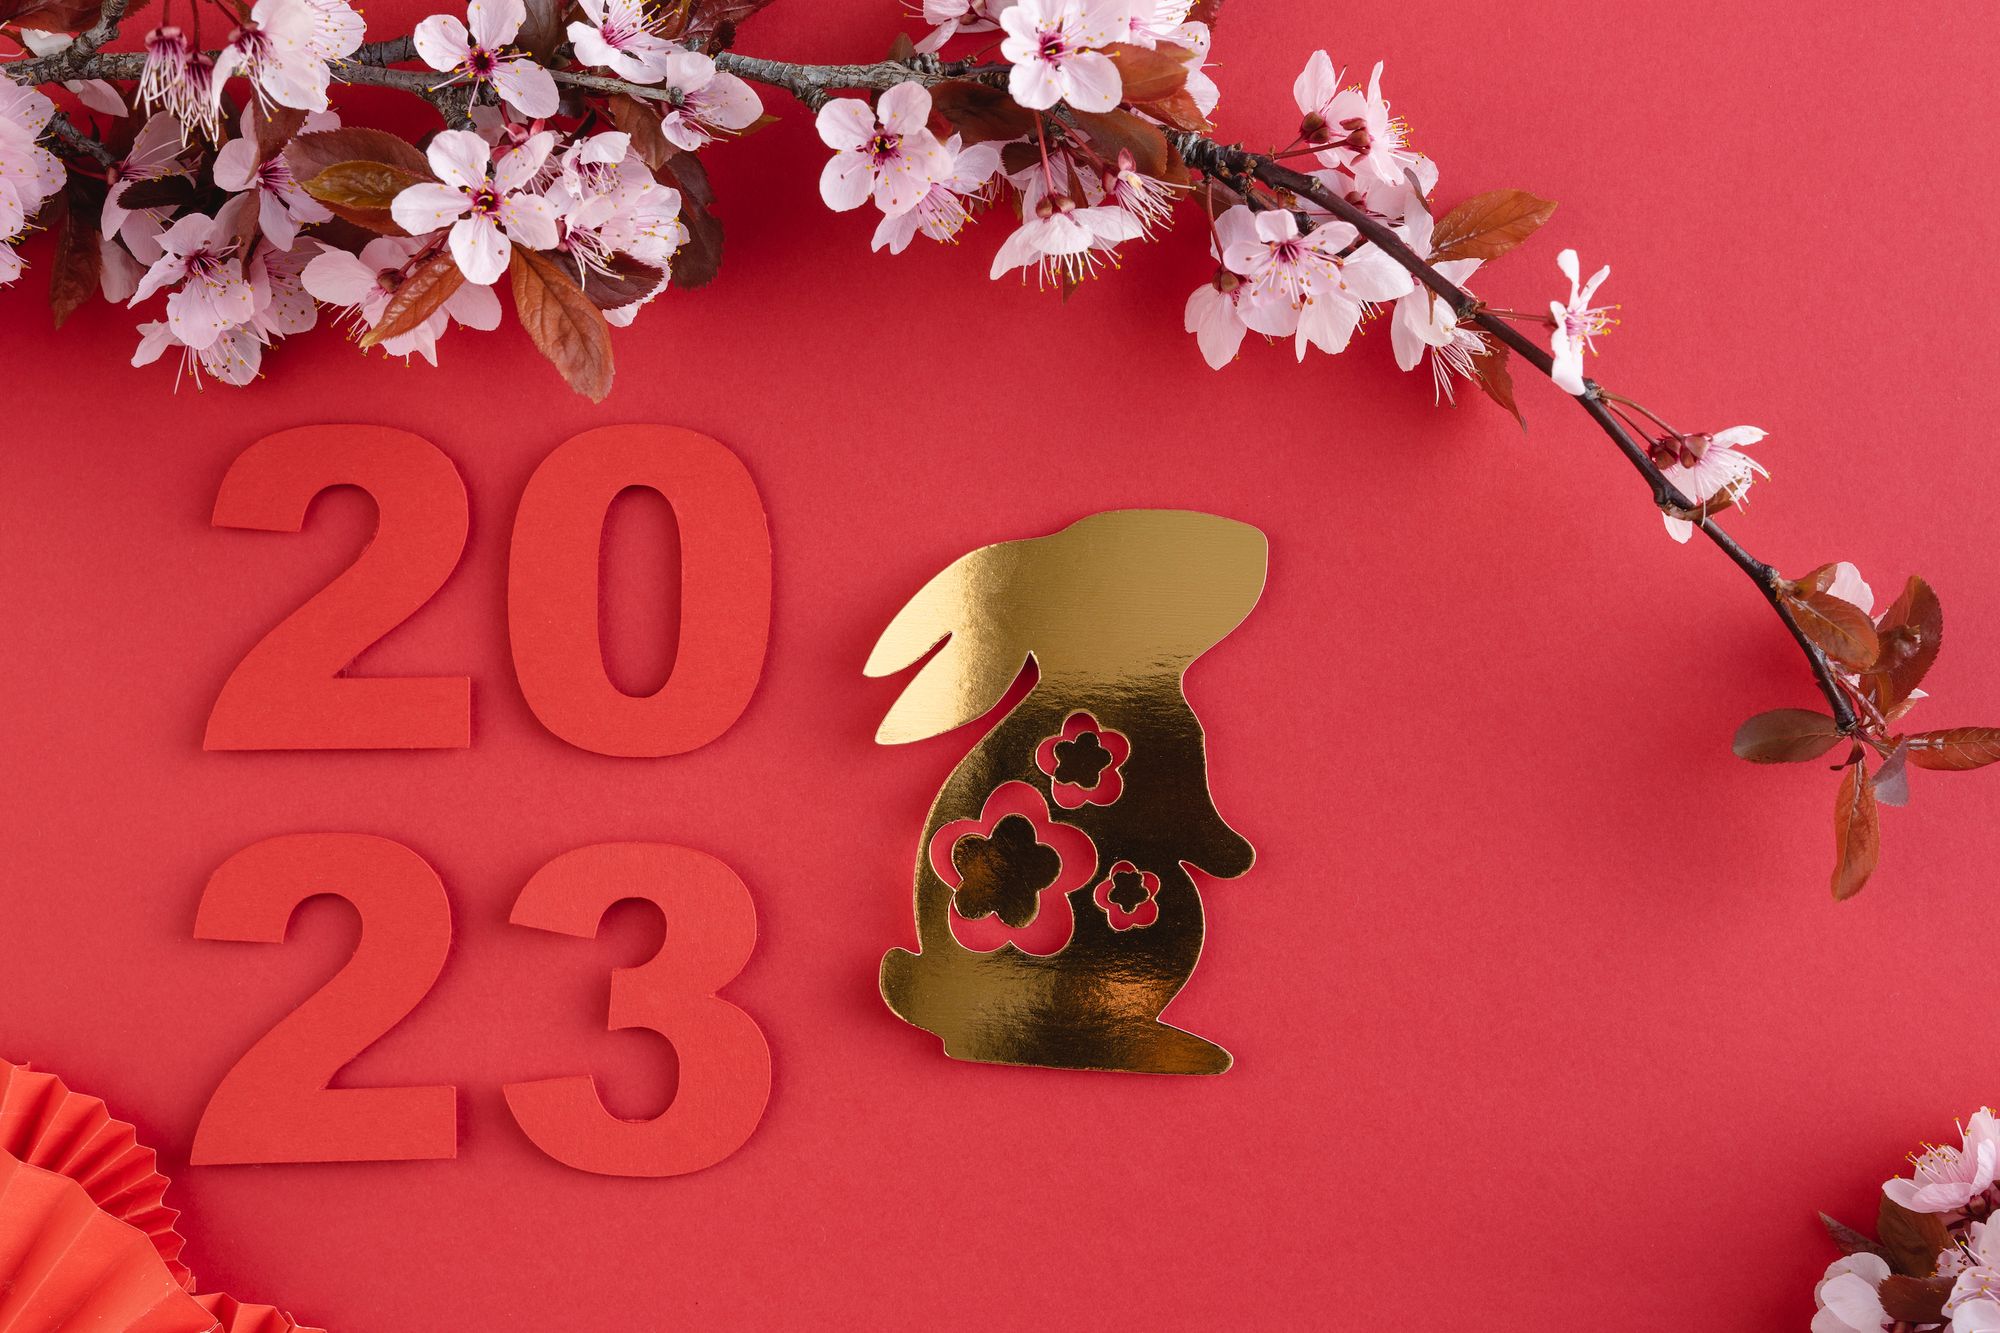 chinese-new-year-year-rabbit-red-background-with-golden-rabbit-cut-paper-decoration-copy-space (1).jpg